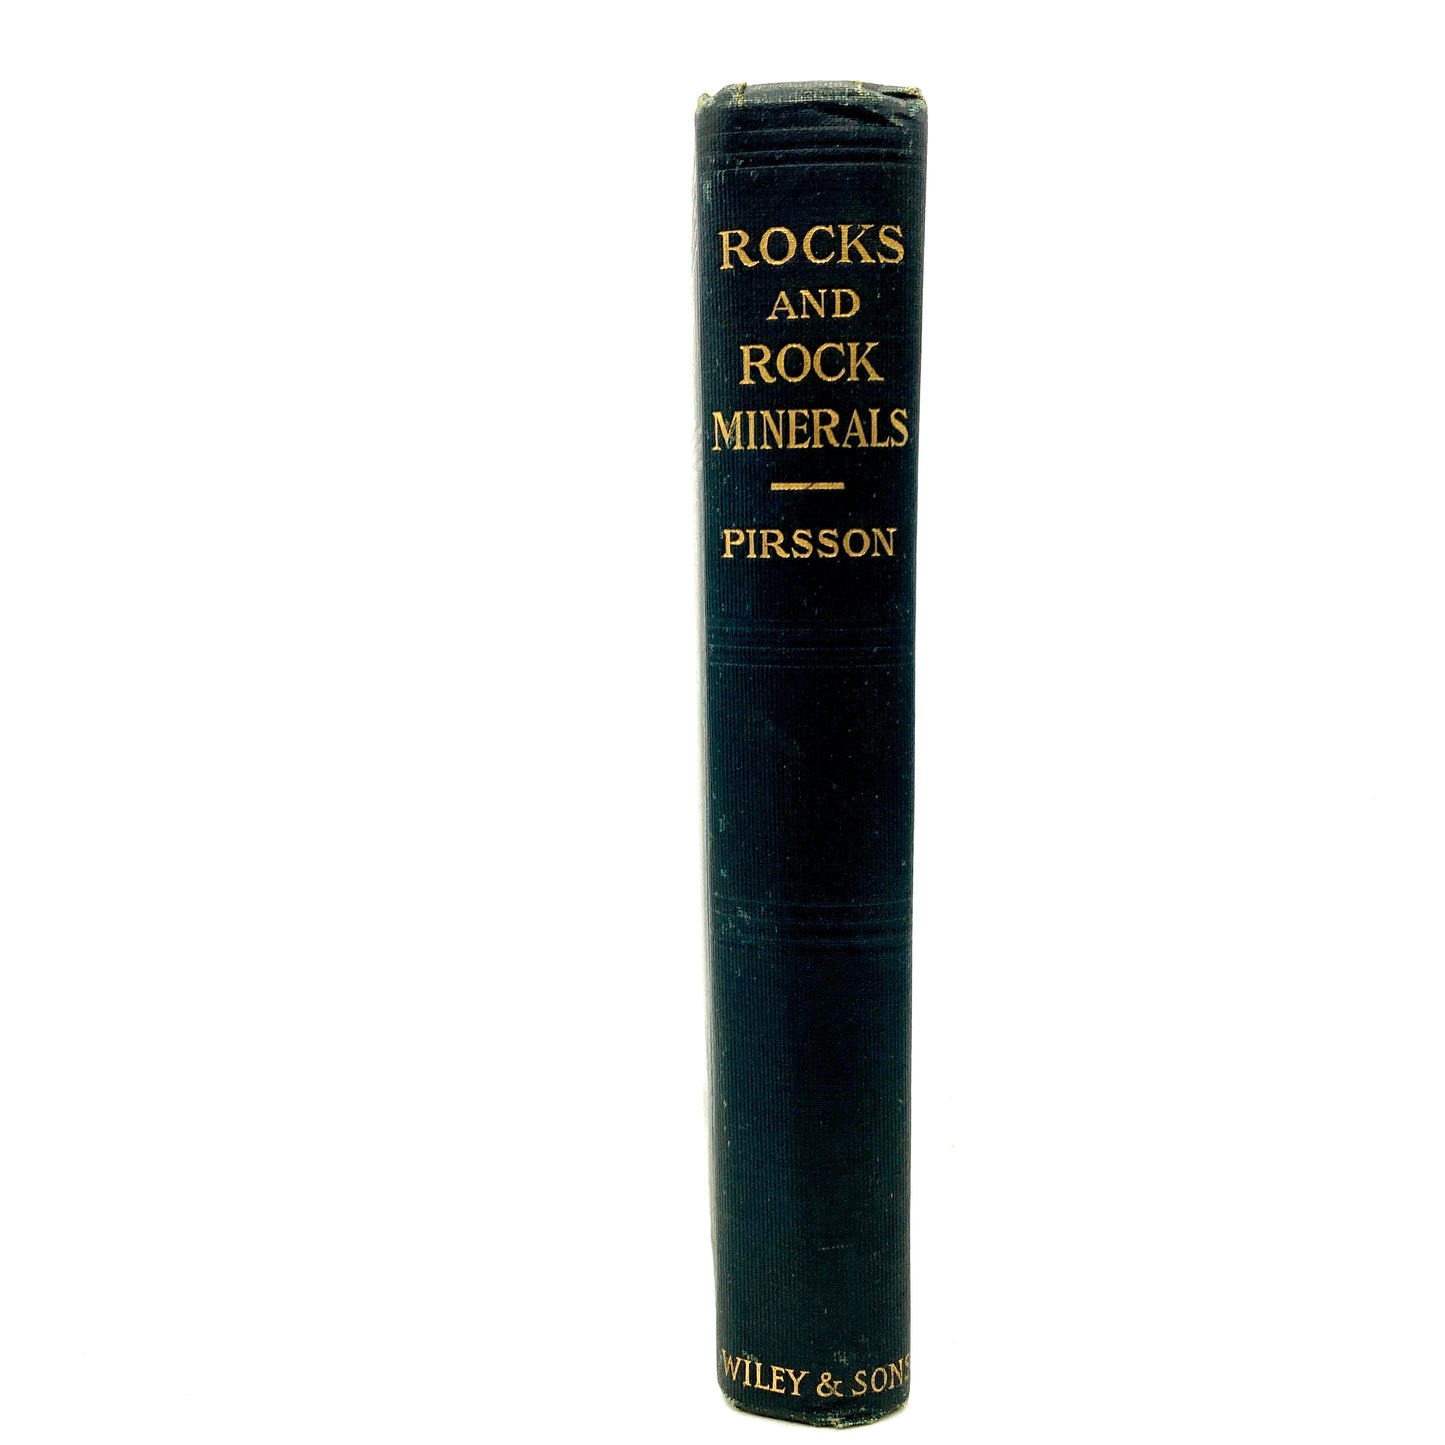 PIRSSON, Louis V. "Rocks and Rock Minerals" [John Wiley & Sons, 1909] - Buzz Bookstore